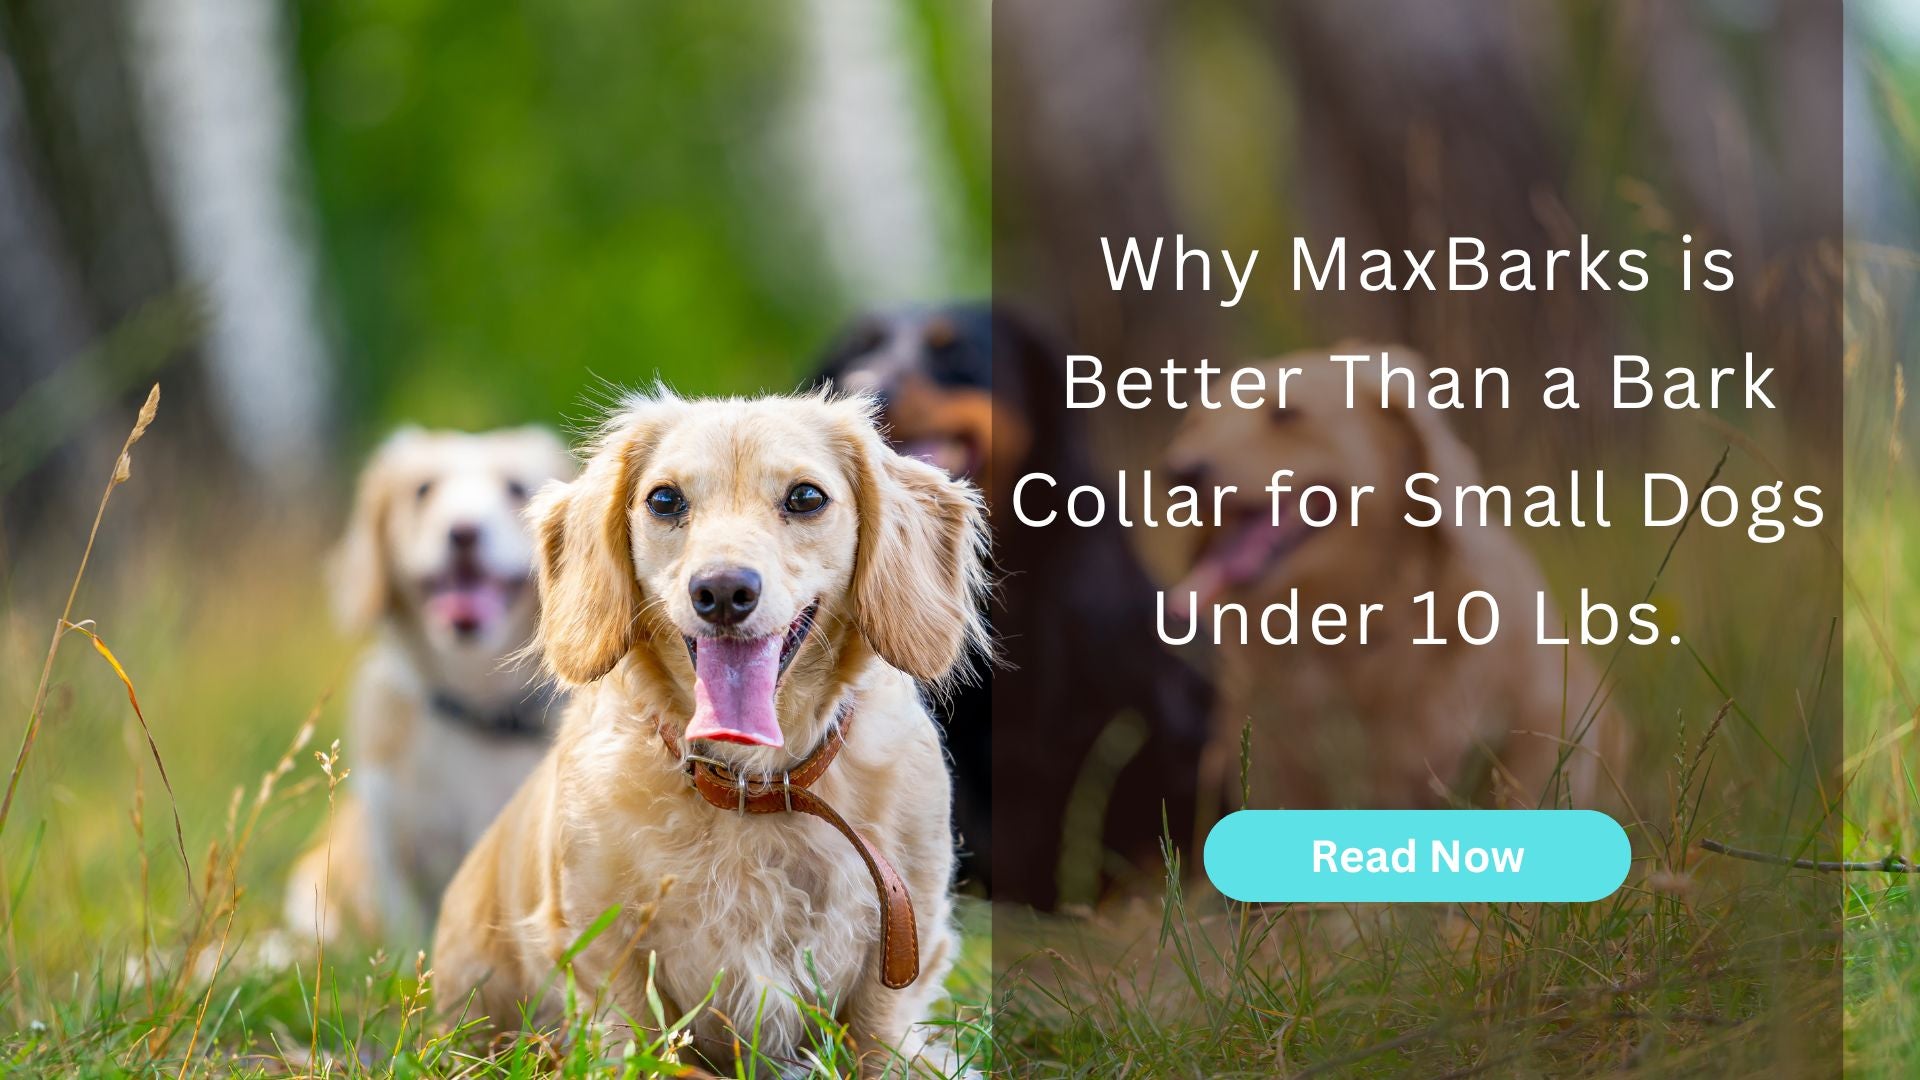 Why MaxBarks is Better Than a Bark Collar for Small Dogs Under 10 Lbs.